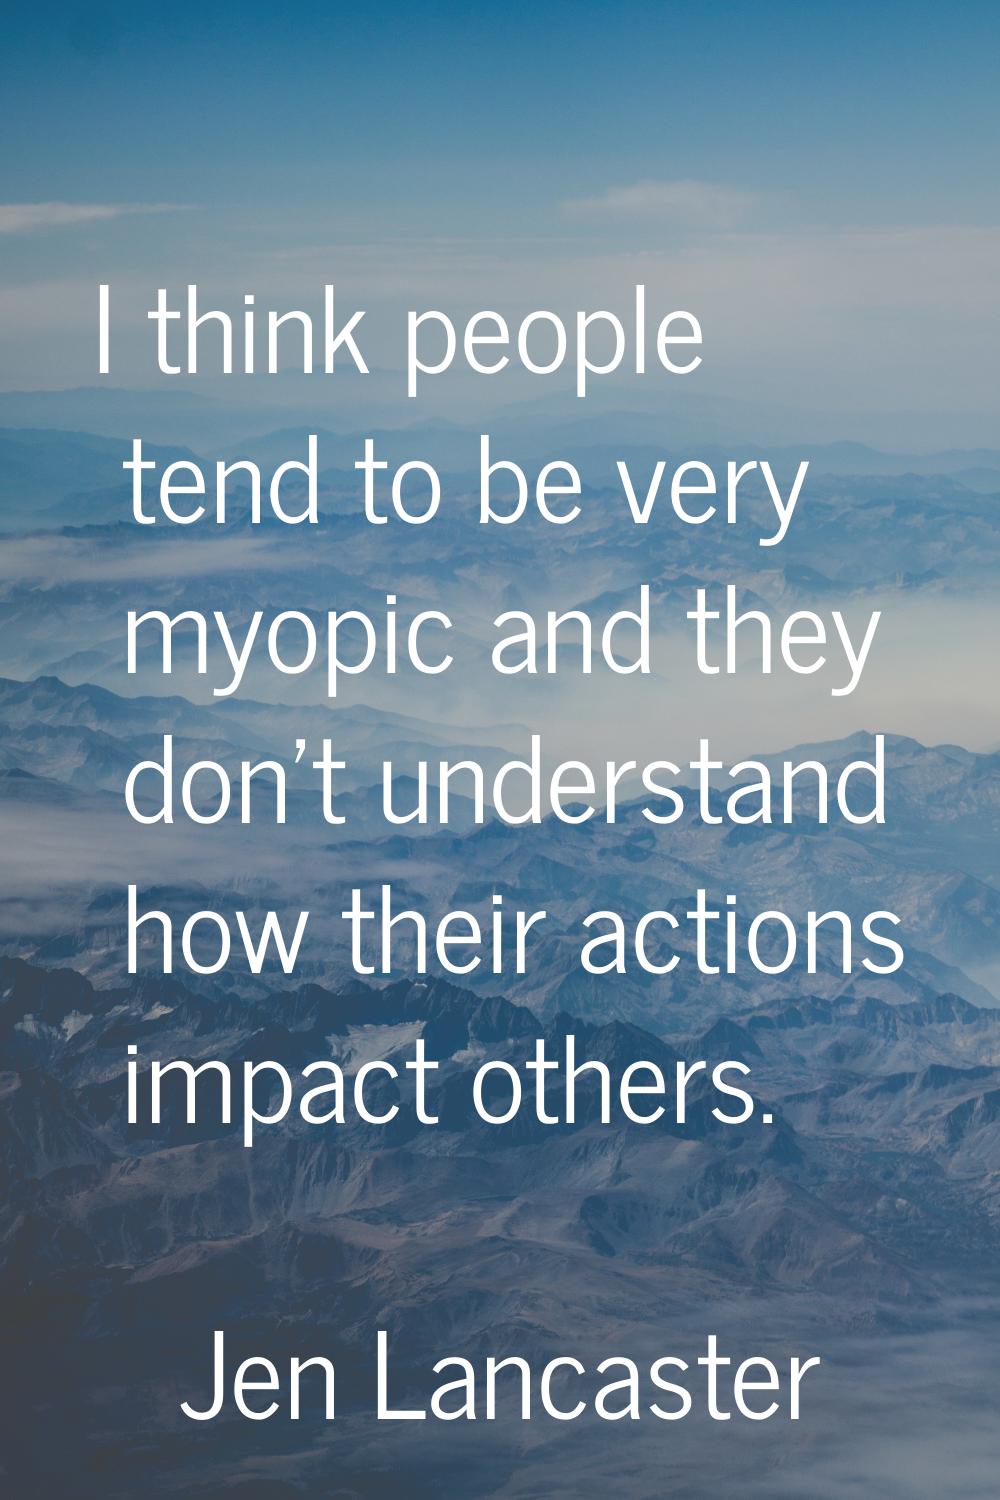 I think people tend to be very myopic and they don't understand how their actions impact others.